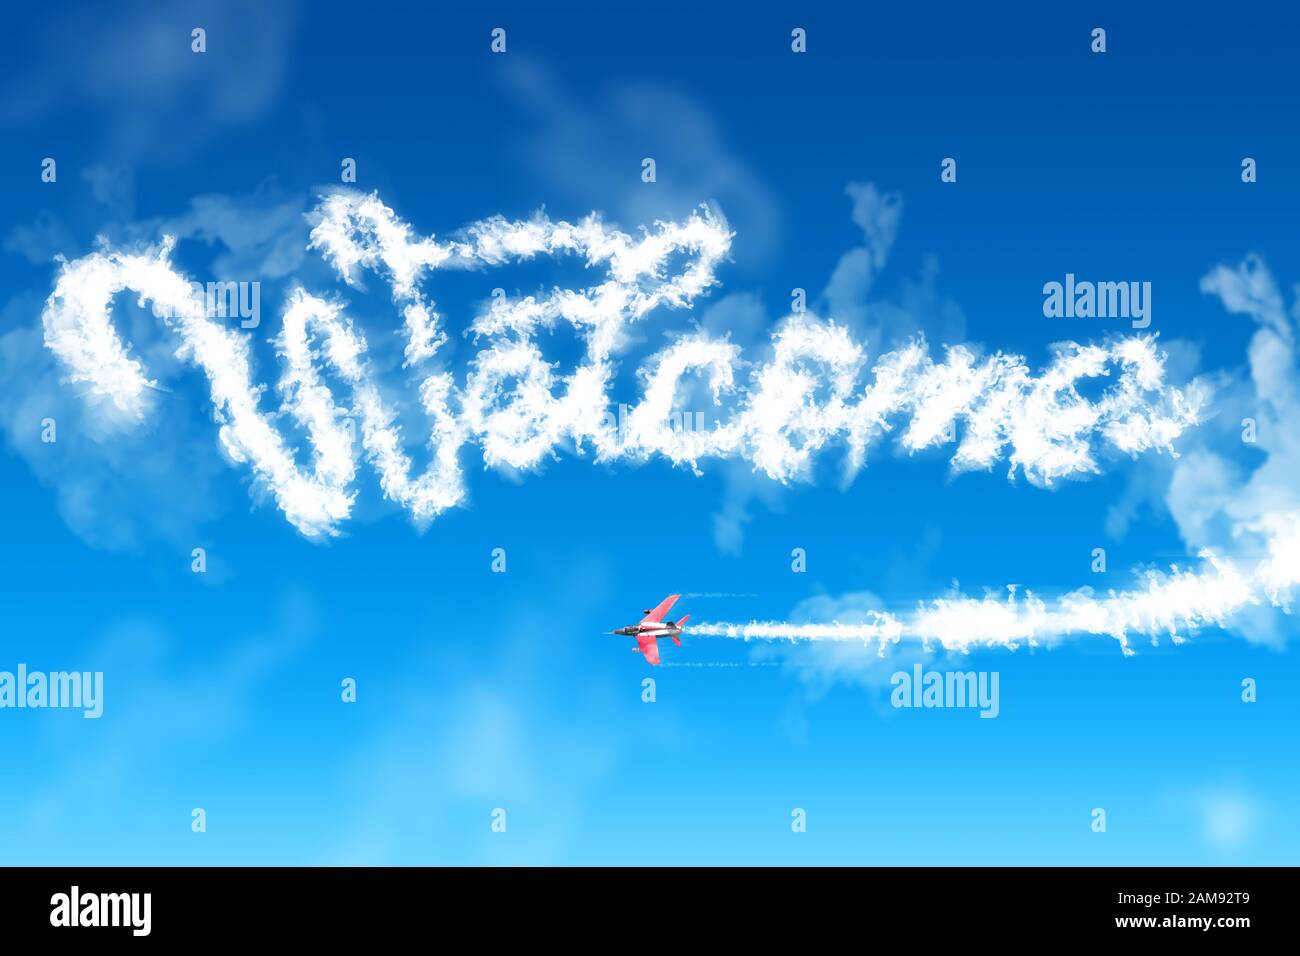 Word welcome formed by a smoke trail from a jet plane. Stock Photo